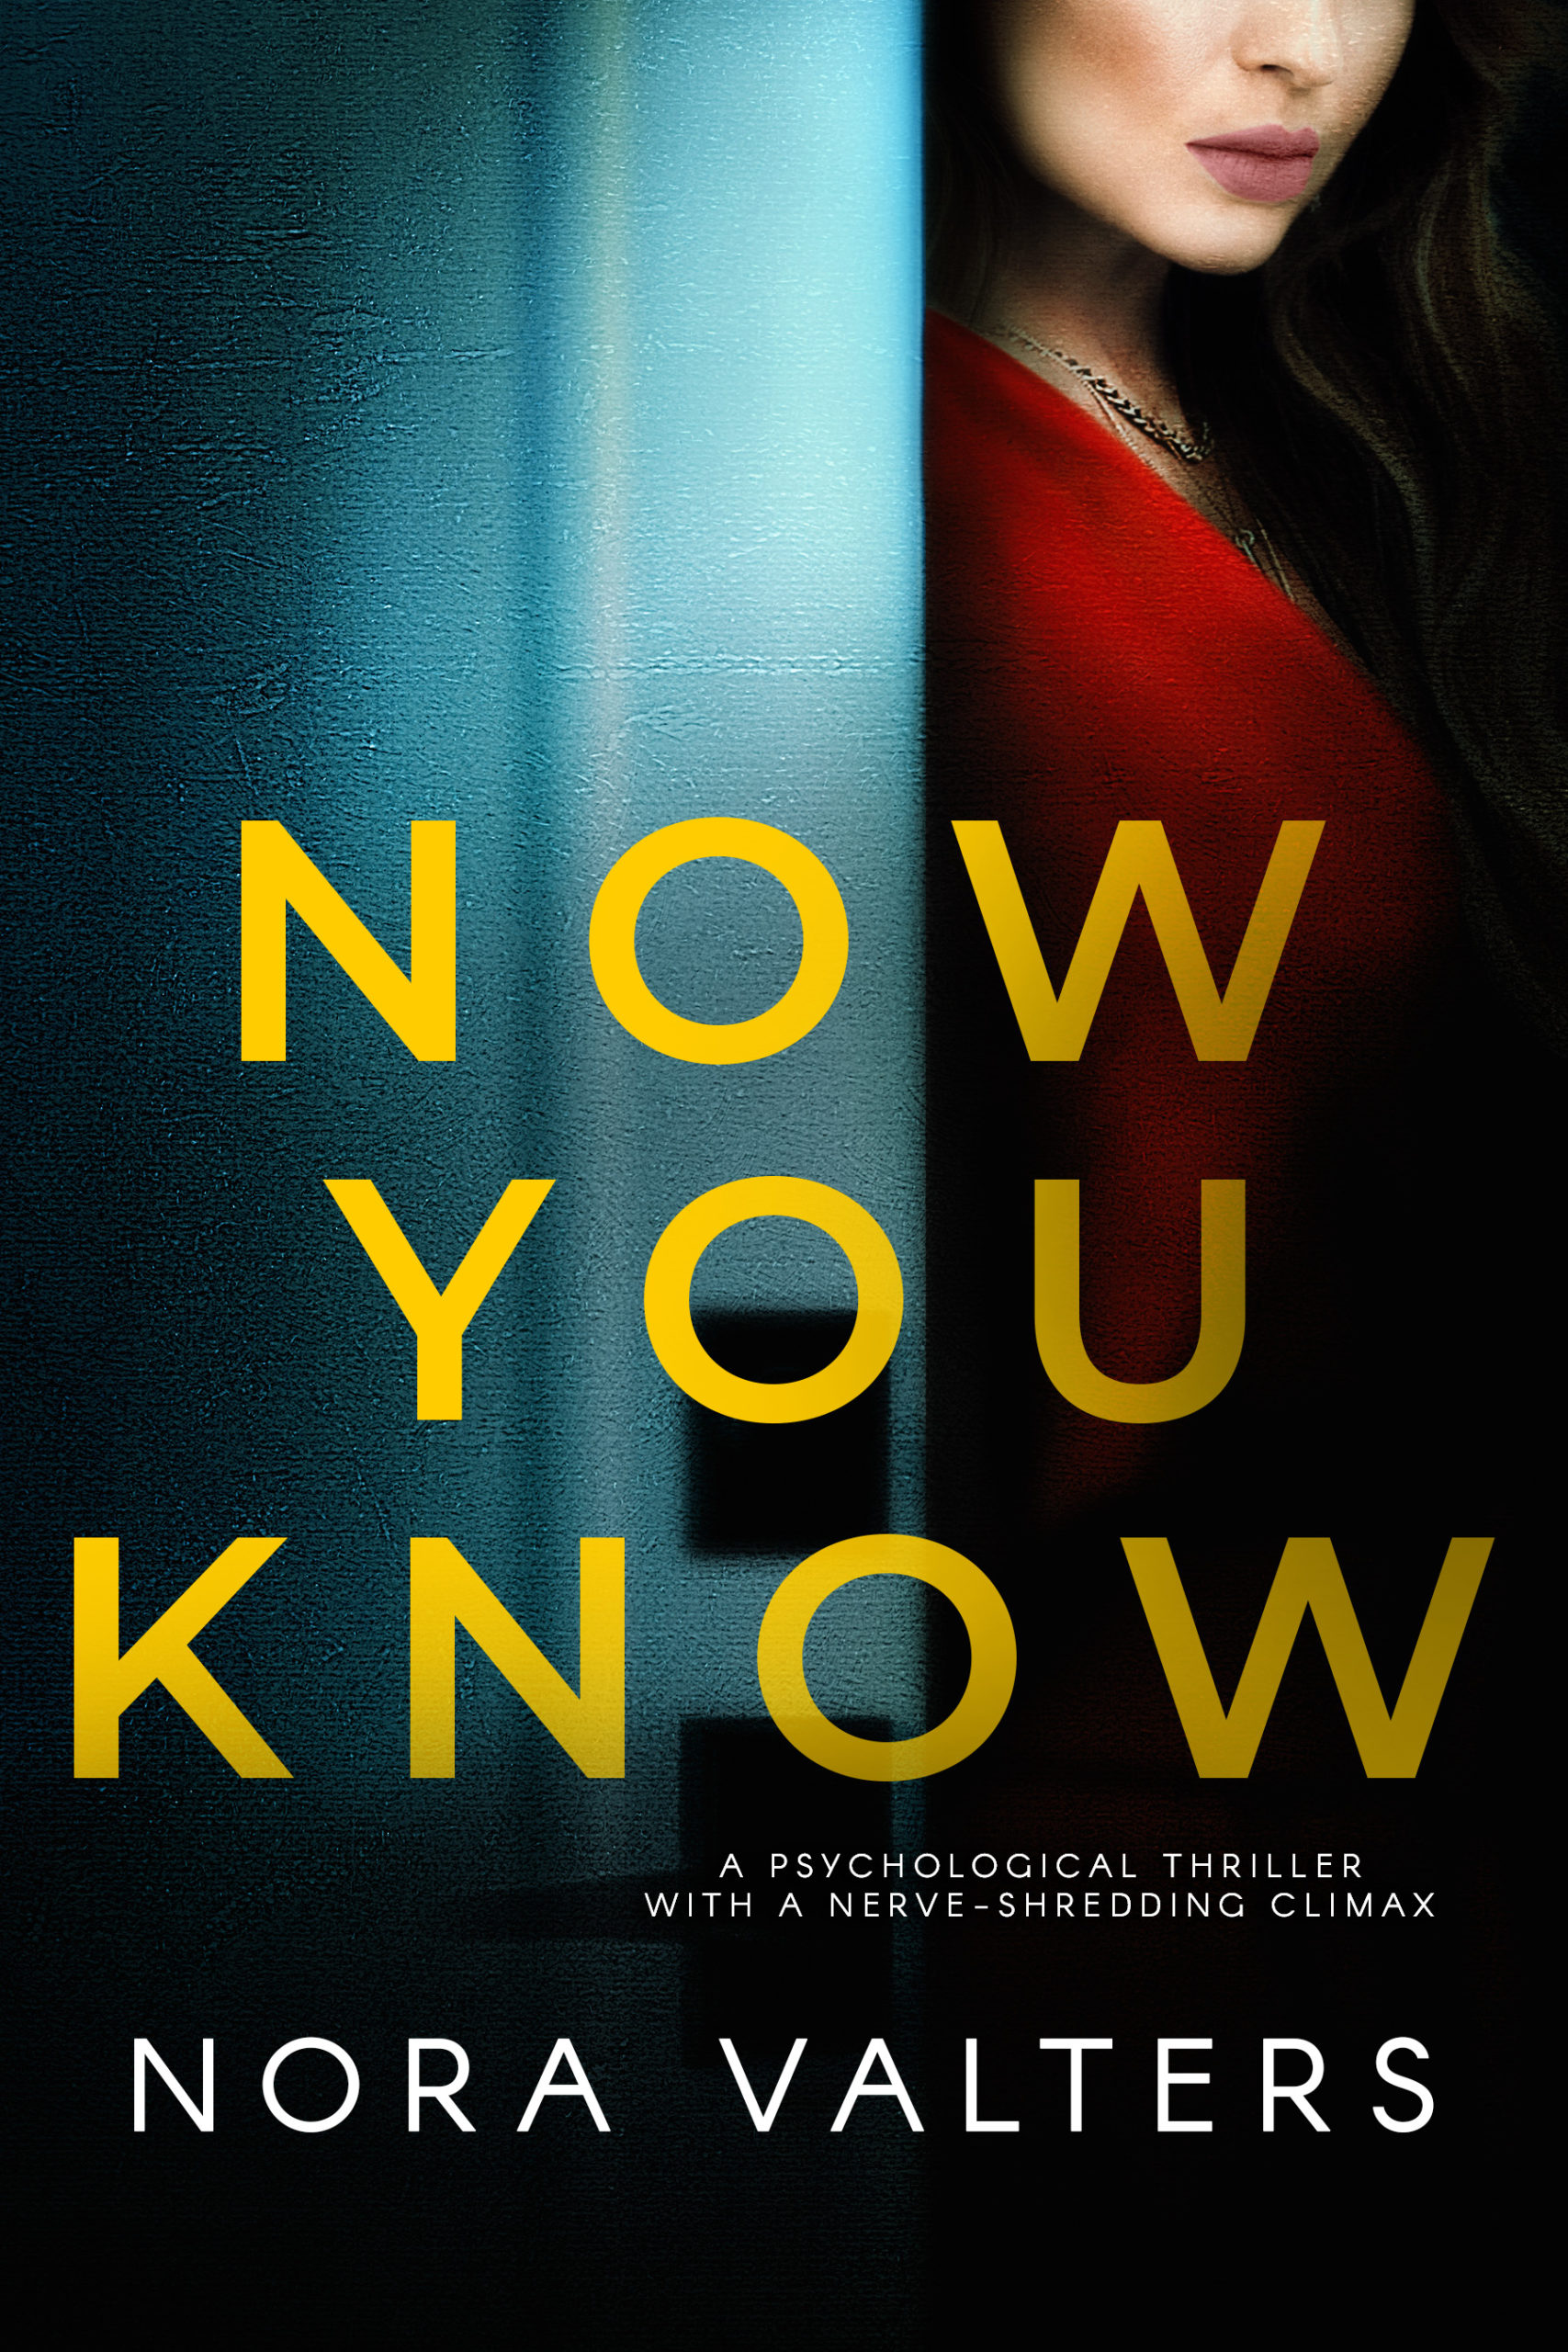 NORA VALTERS NEW RELEASE – NOW YOU KNOW